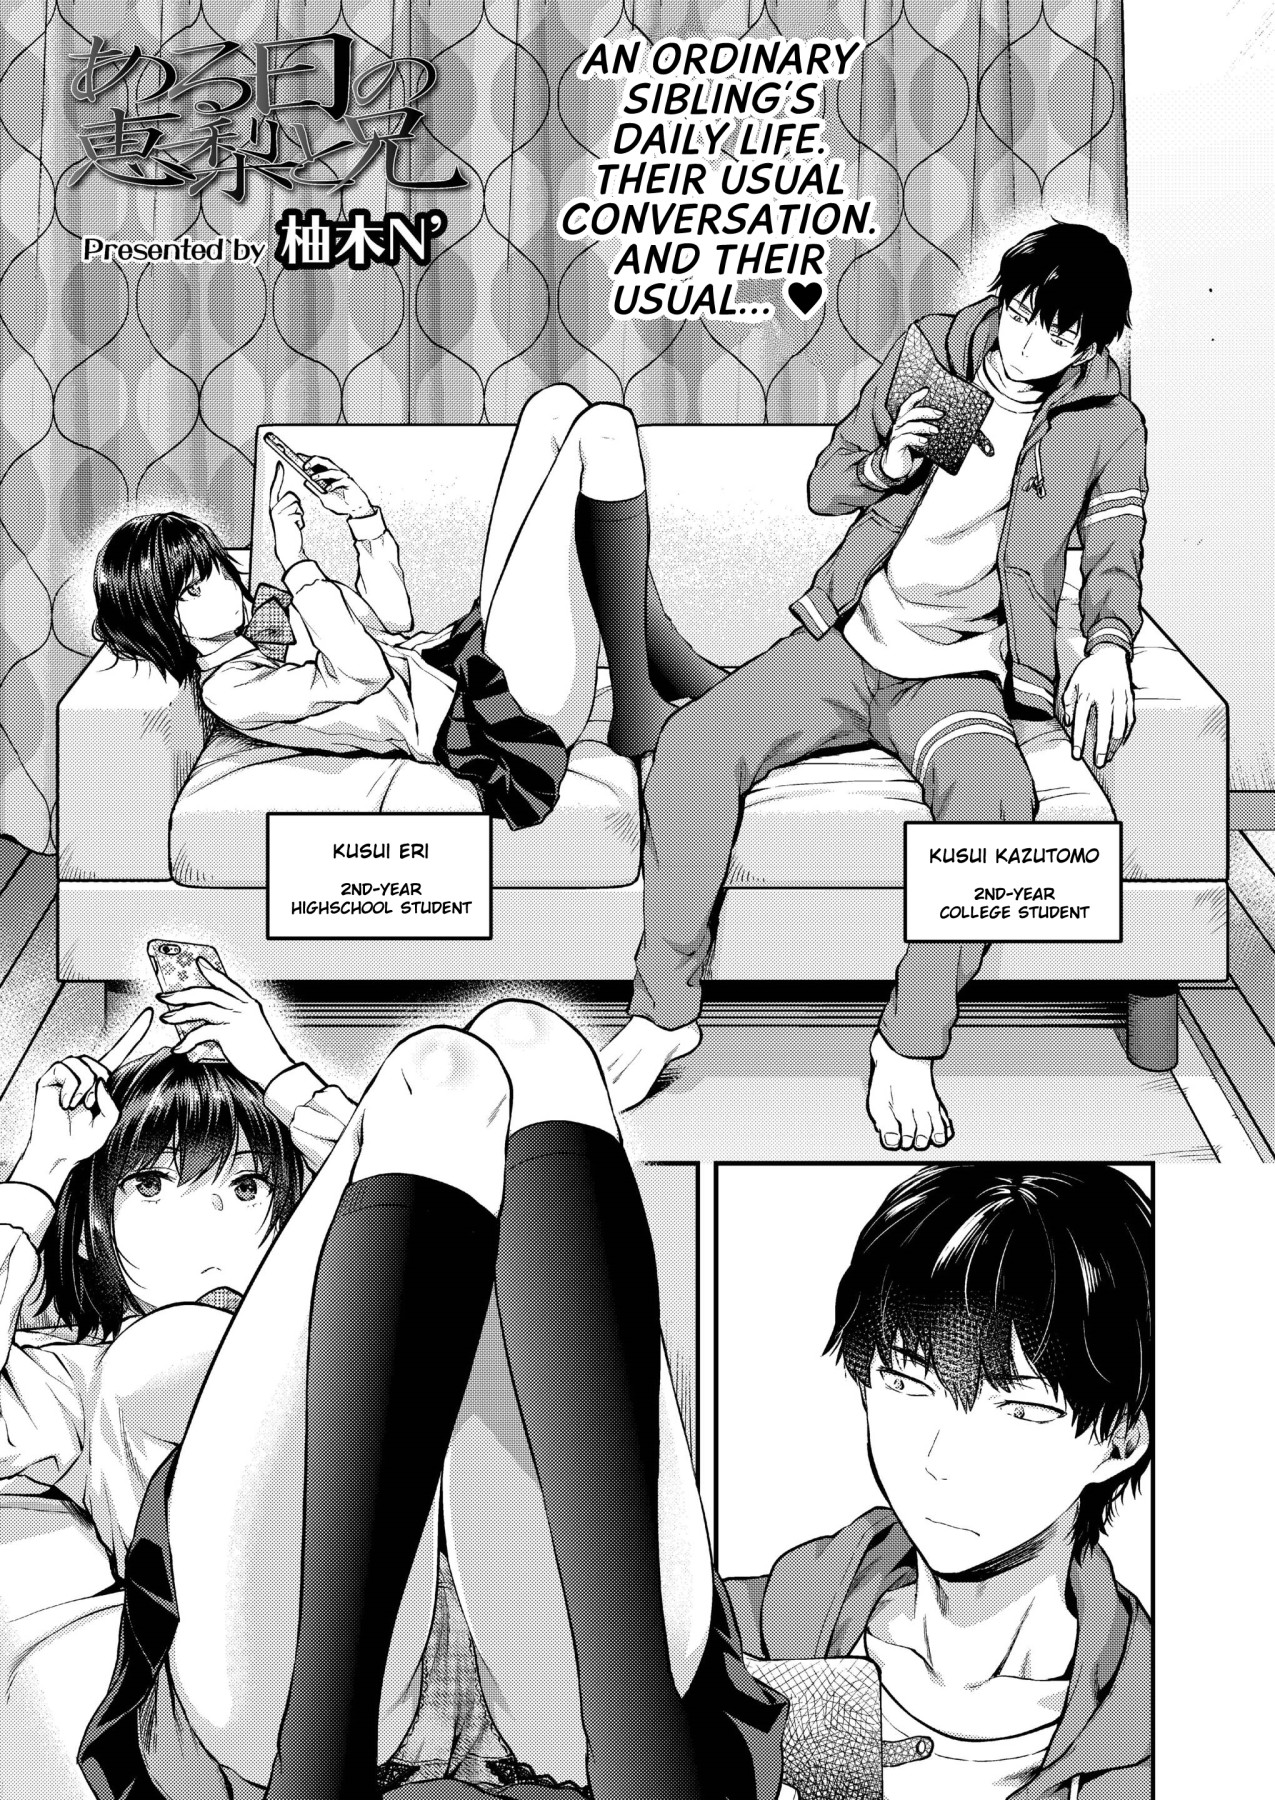 Hentai Manga Comic-Eri and Her Older Brother on a Certain Day-Read-1